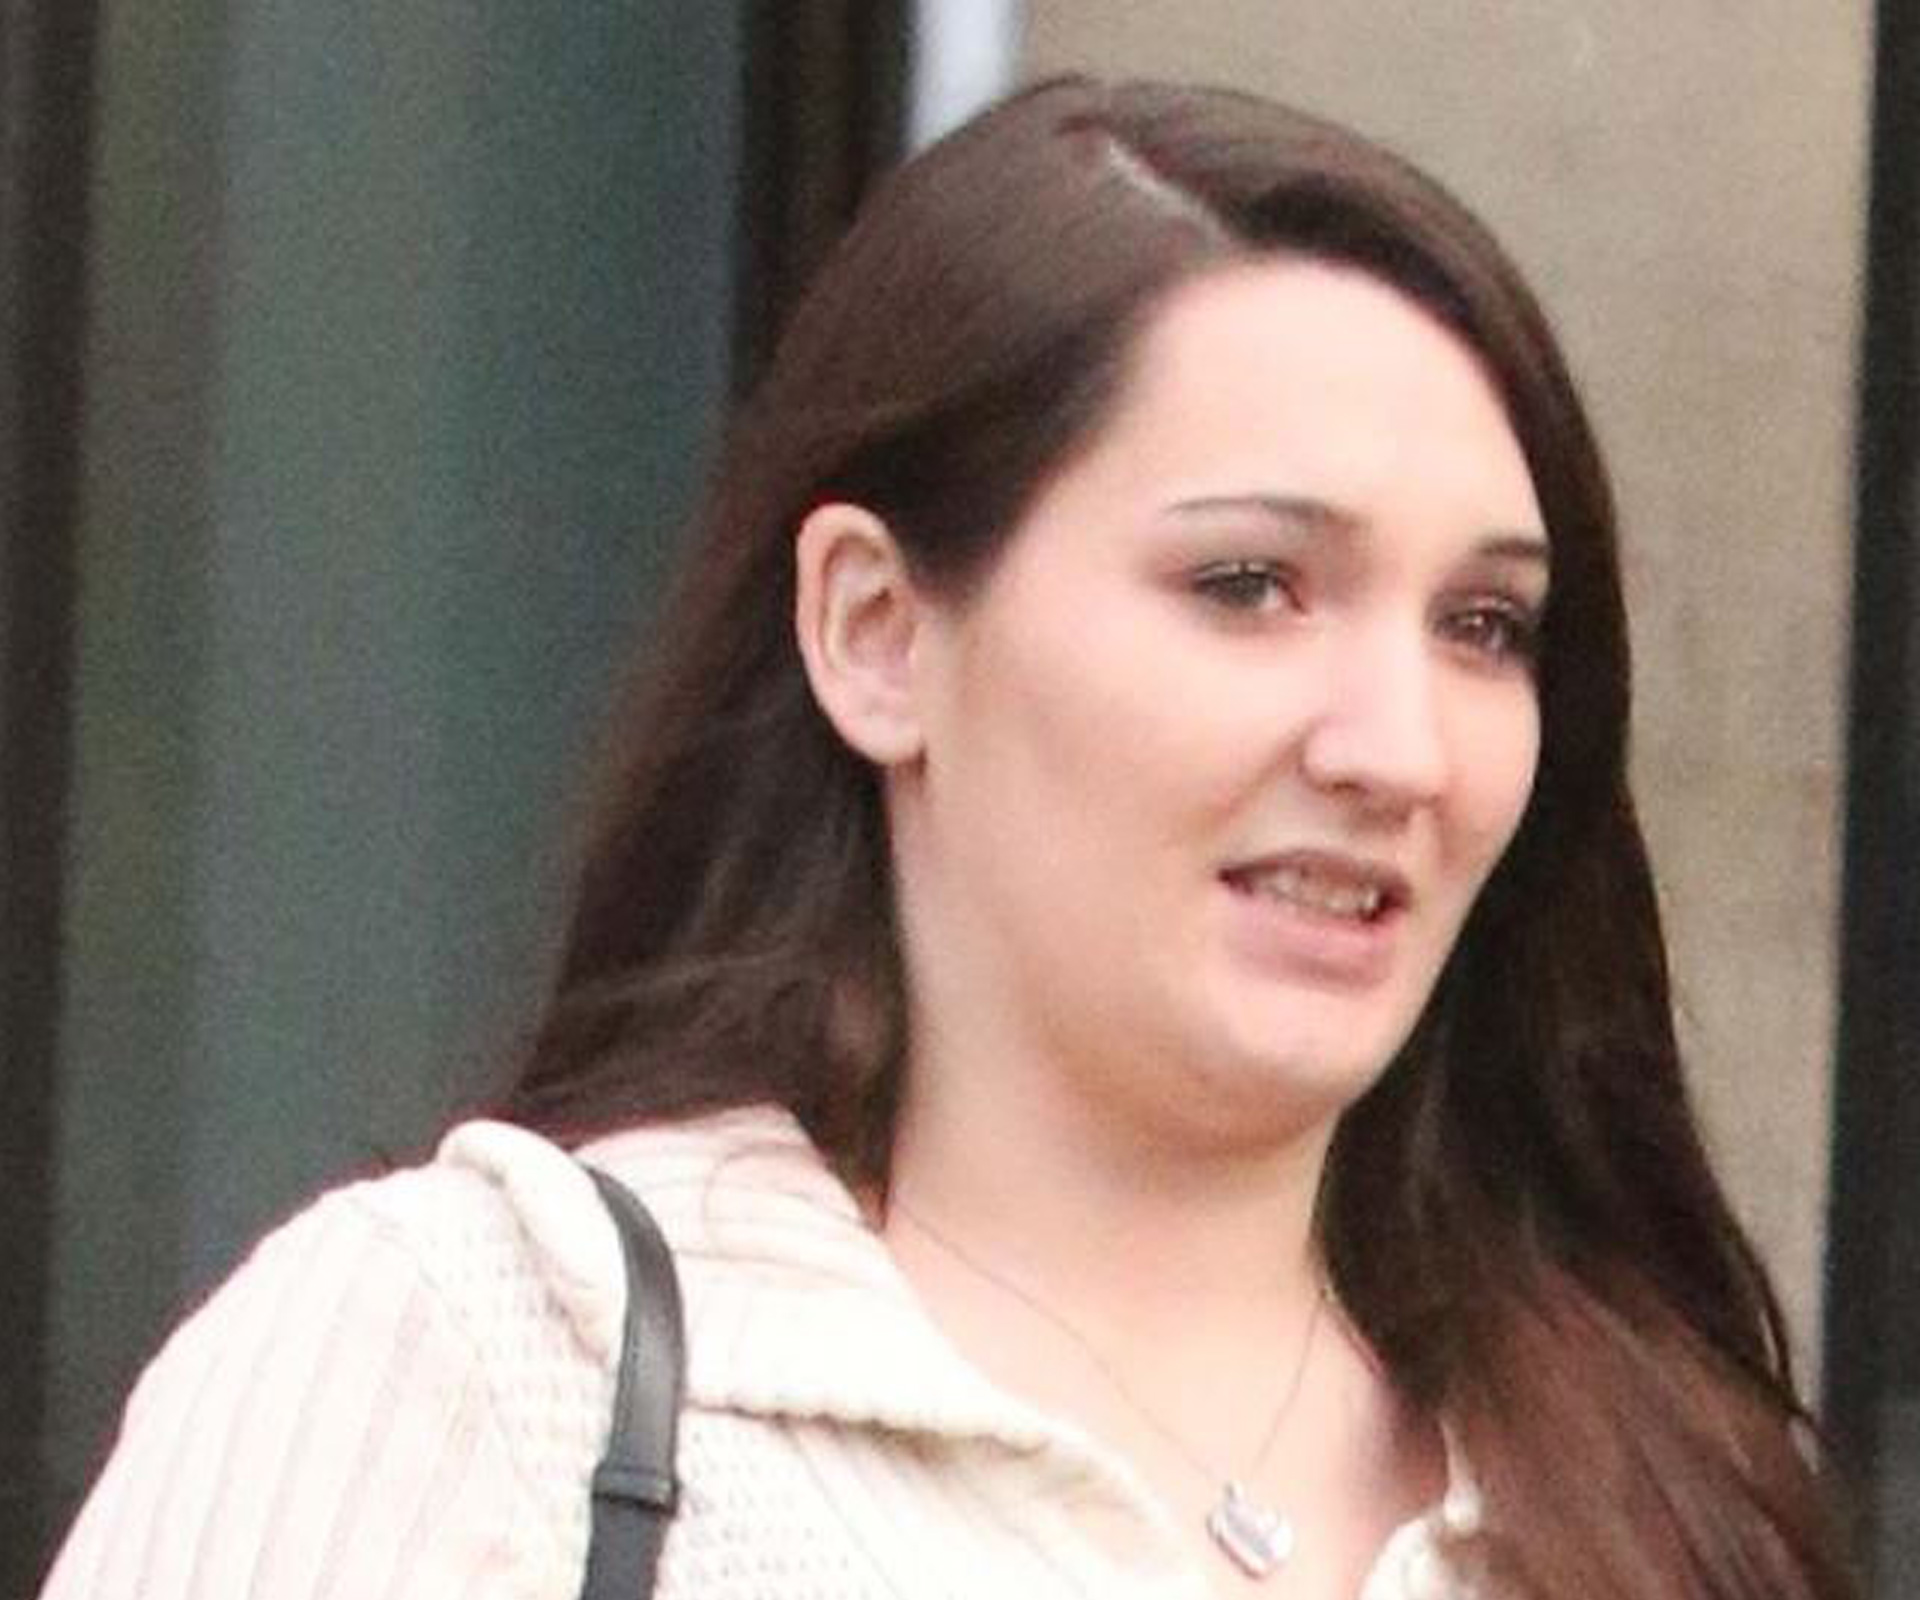 Woman jailed for child cruelty after son drowned while she was checking Facebook